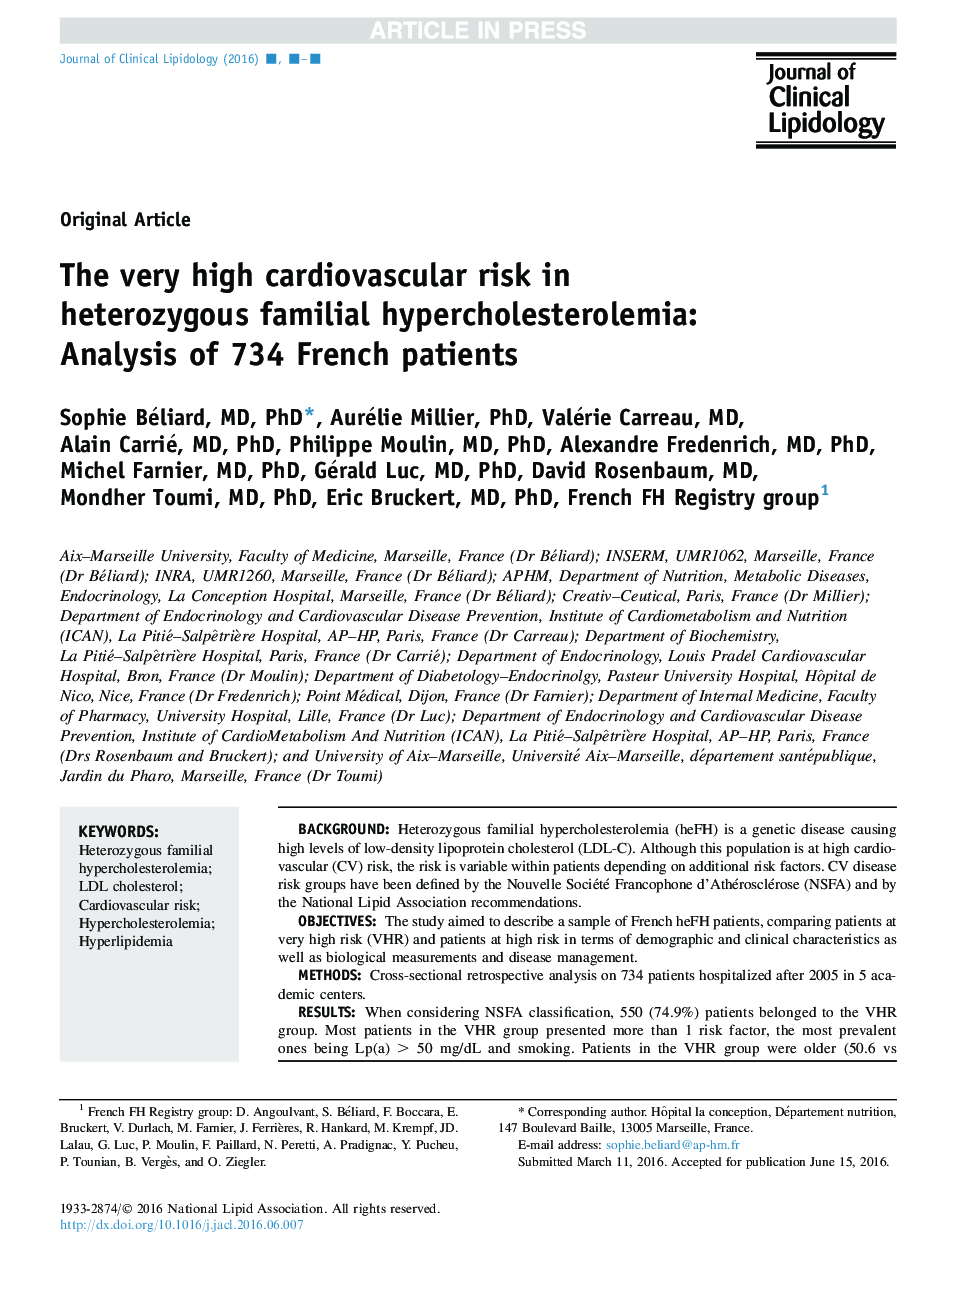 The very high cardiovascular risk in heterozygous familial hypercholesterolemia: Analysis of 734 French patients